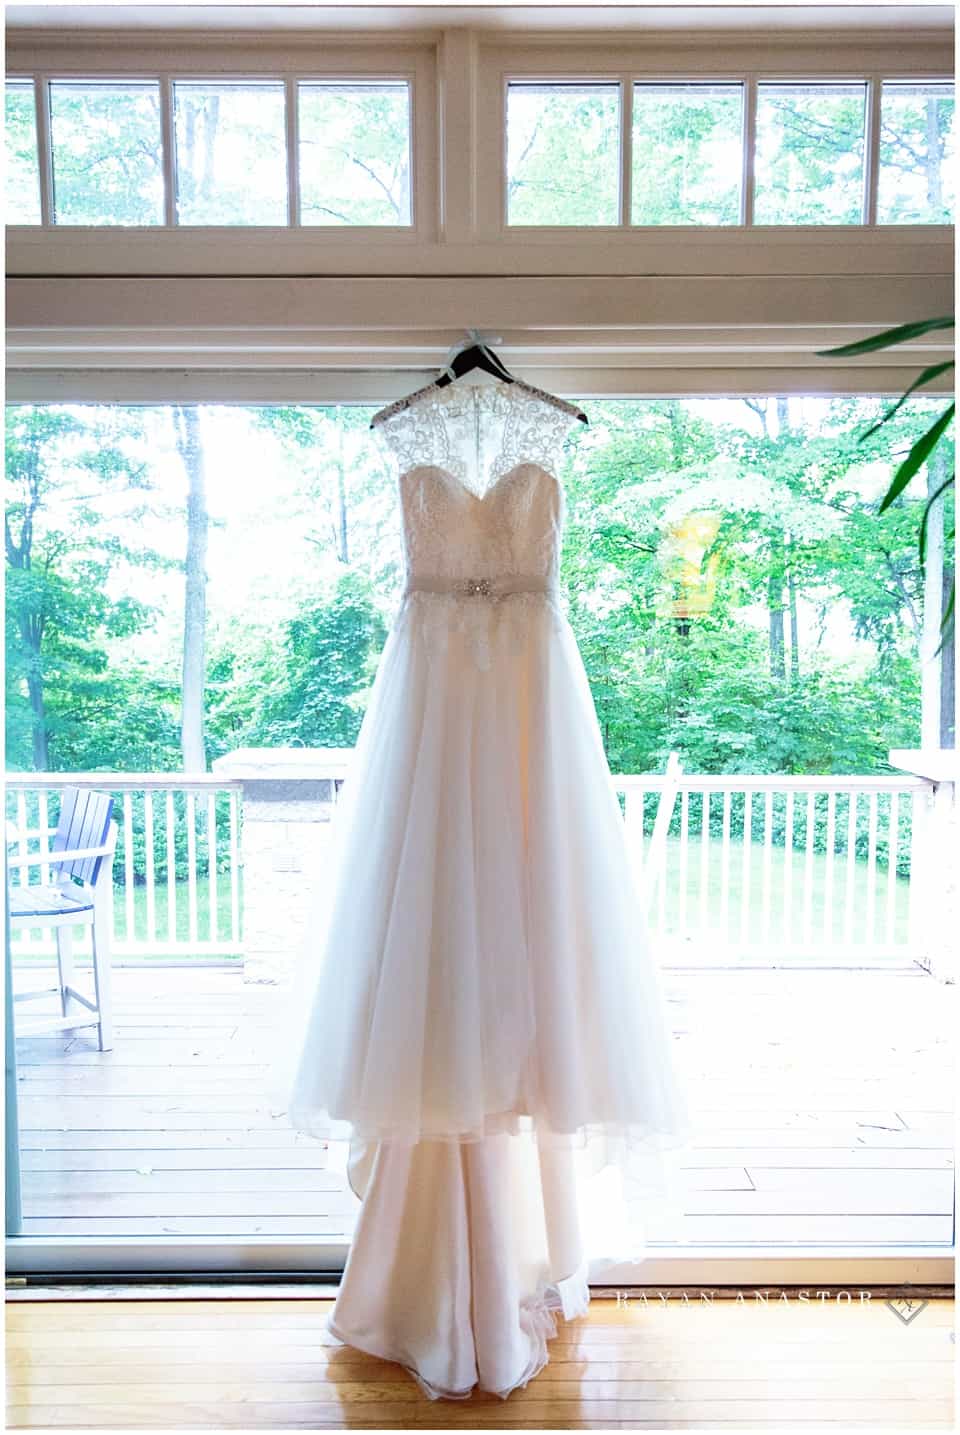 brides dress from the Wedding Shoppe